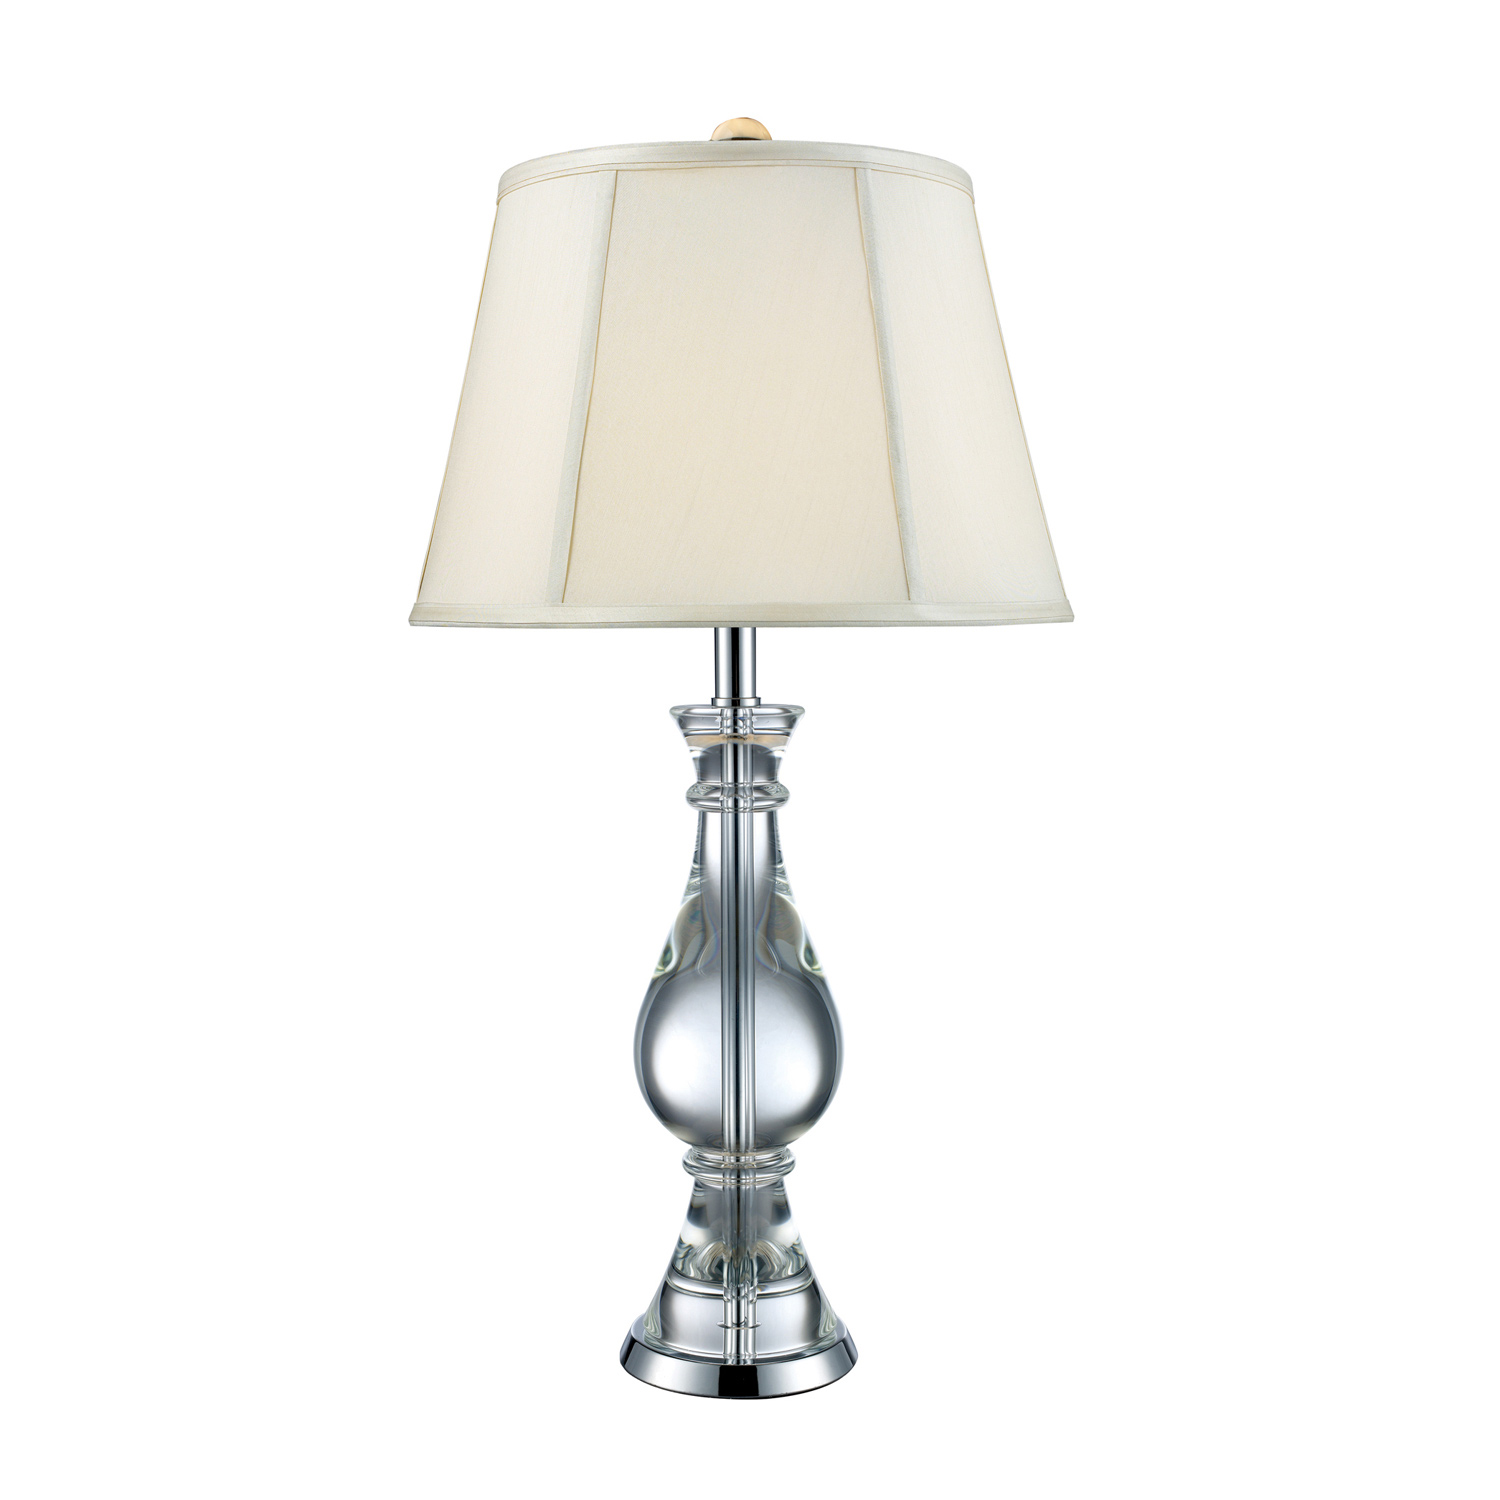 Elk Lighting D1809 Kentwood Table Lamp - Clear Crystal and Chrome